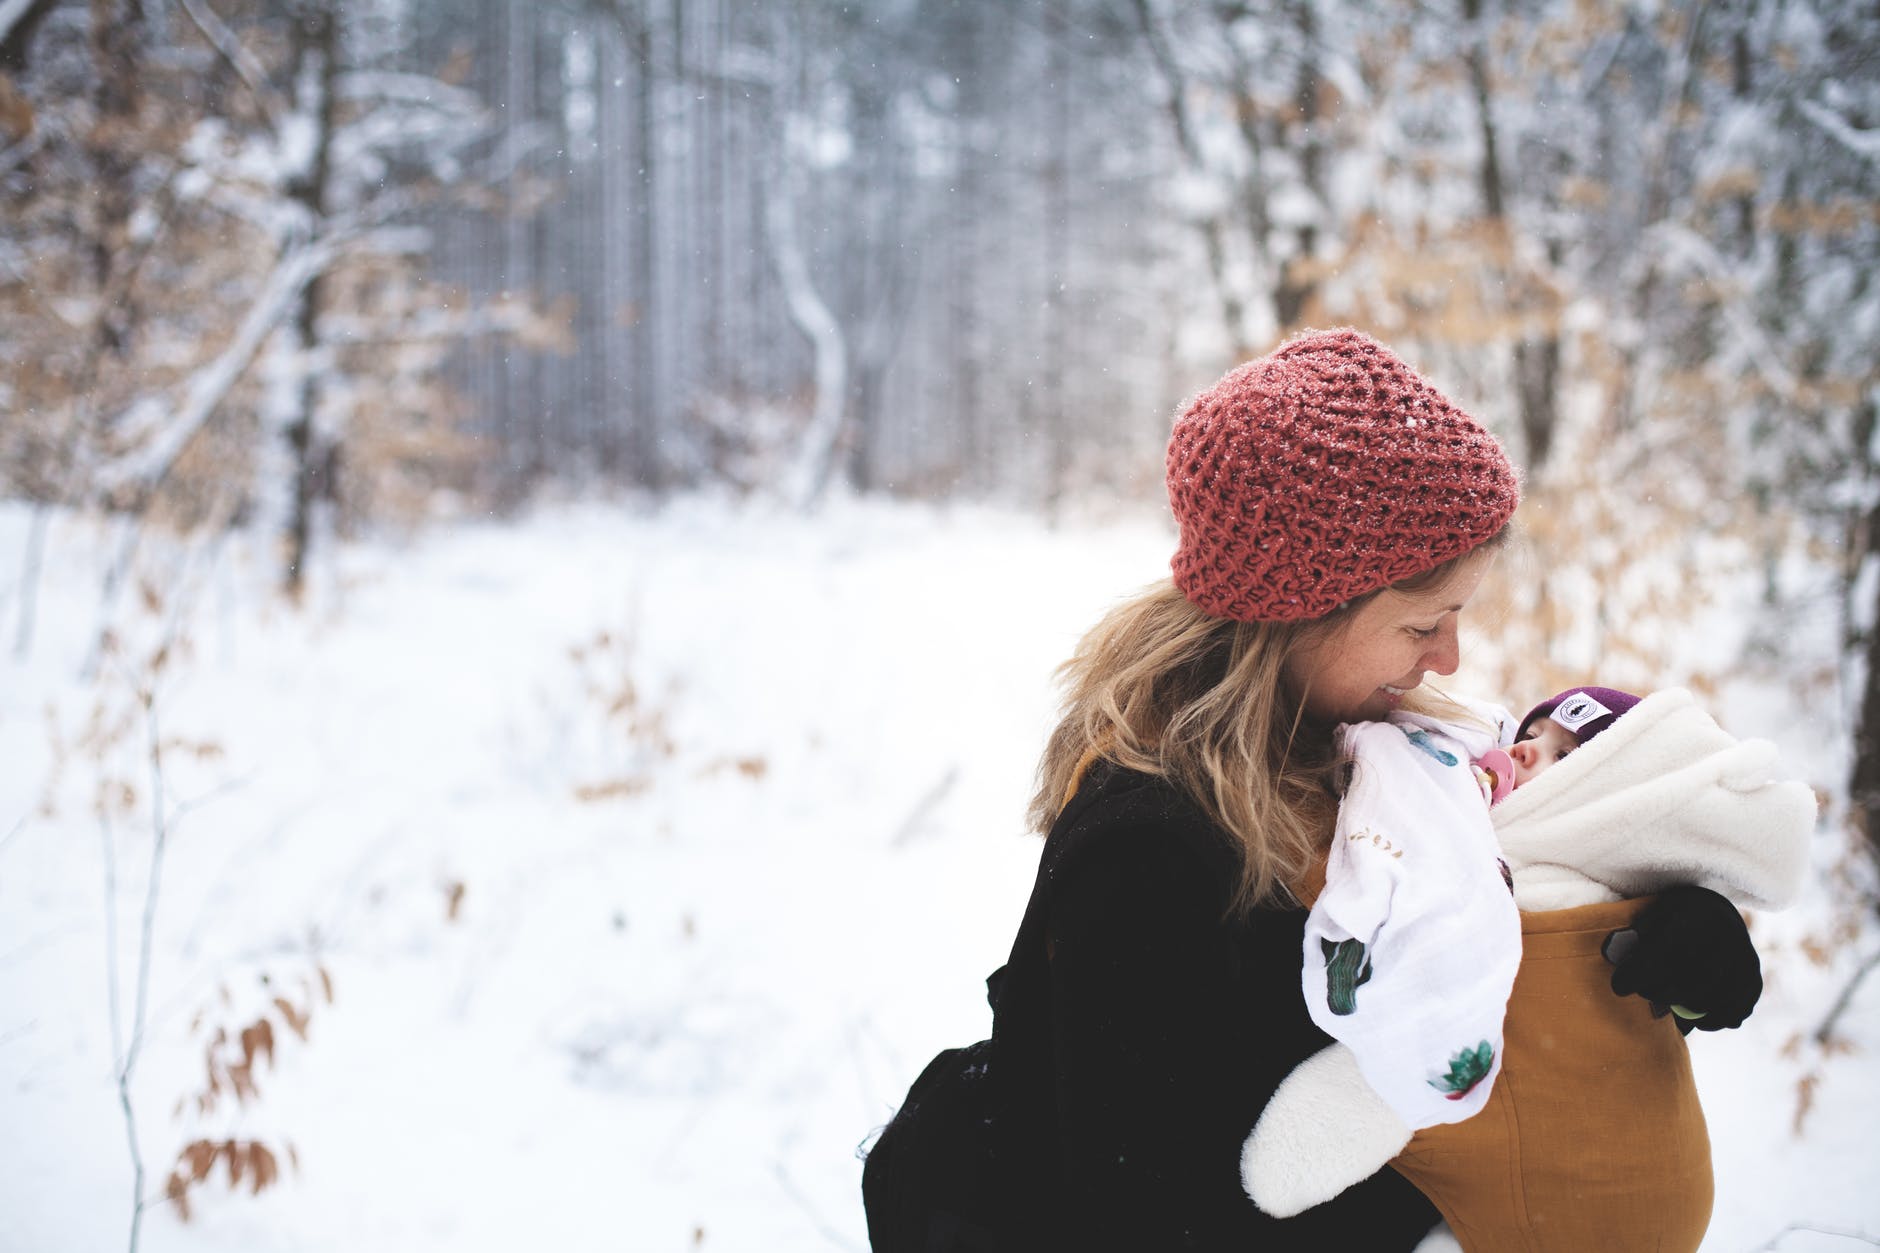 She held her daughter tightly and thanked everyone for her rescue. | Source: Pexels